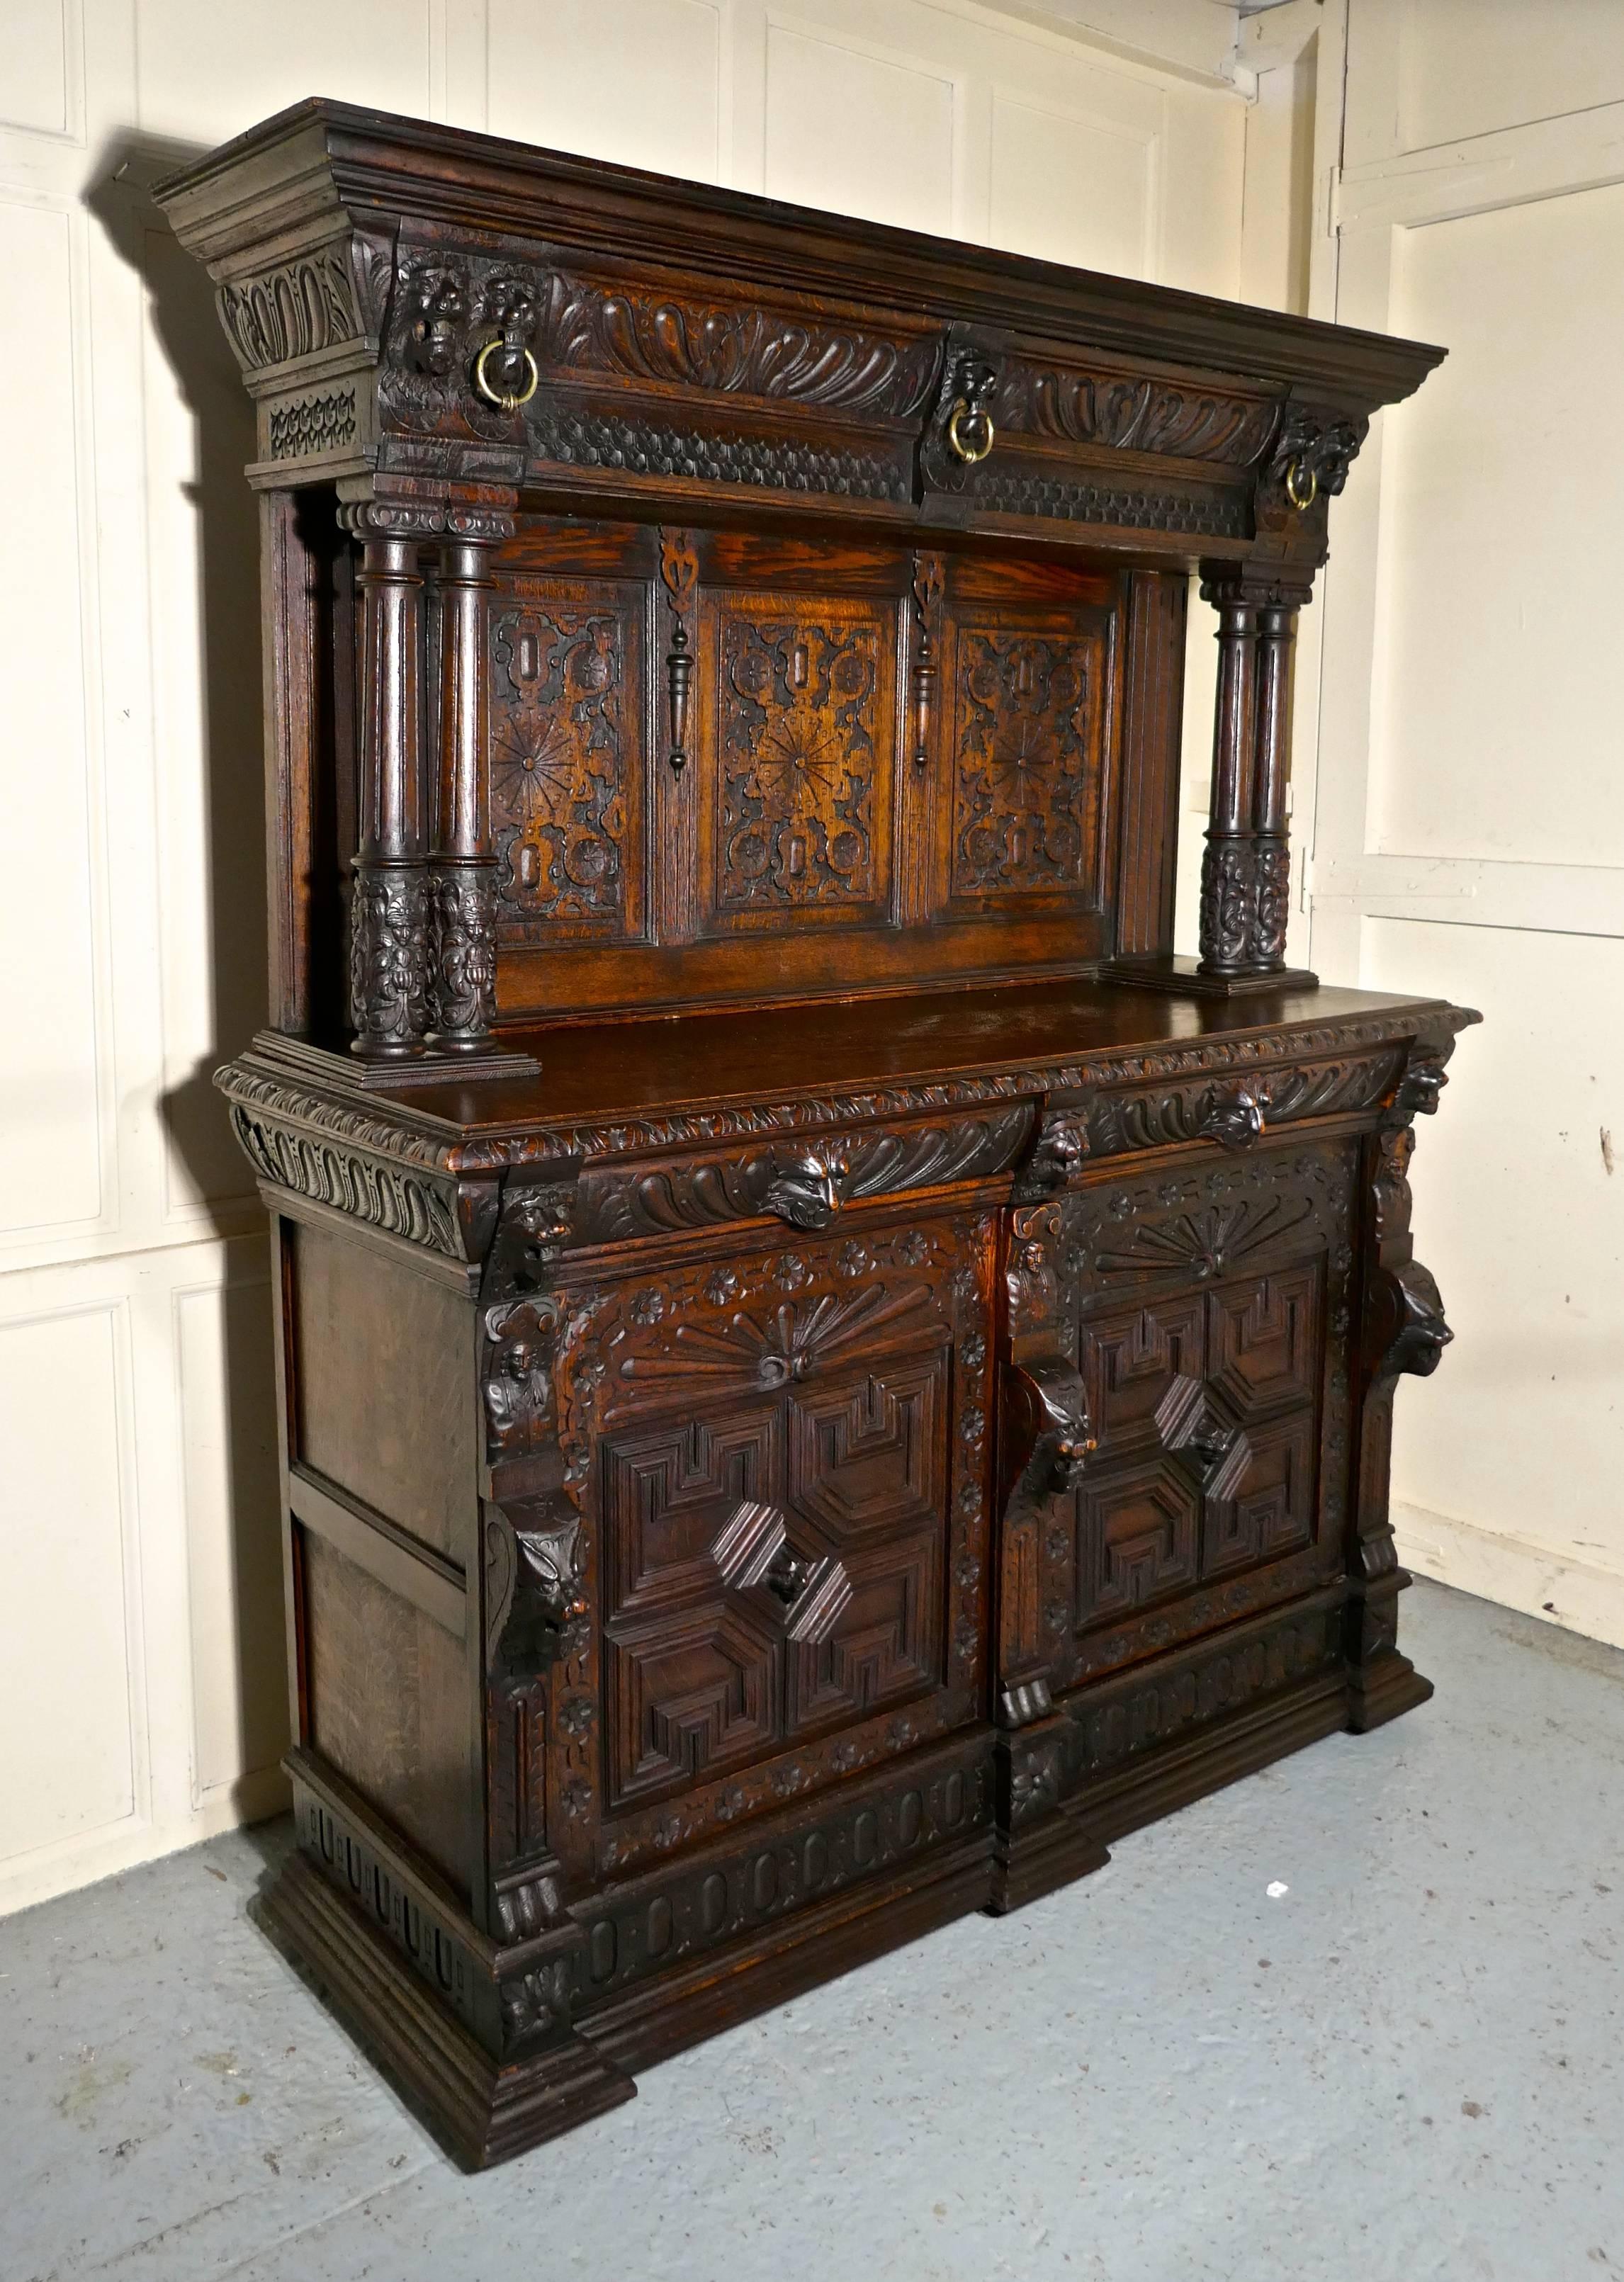 18th century carved oak buffet sideboard dresser


This is a handsome piece with a wonderful patina, the carving is of very fine quality, the gargoyles at the top depict wild cats or the Green Man 
The dresser has a tall carved panelled back